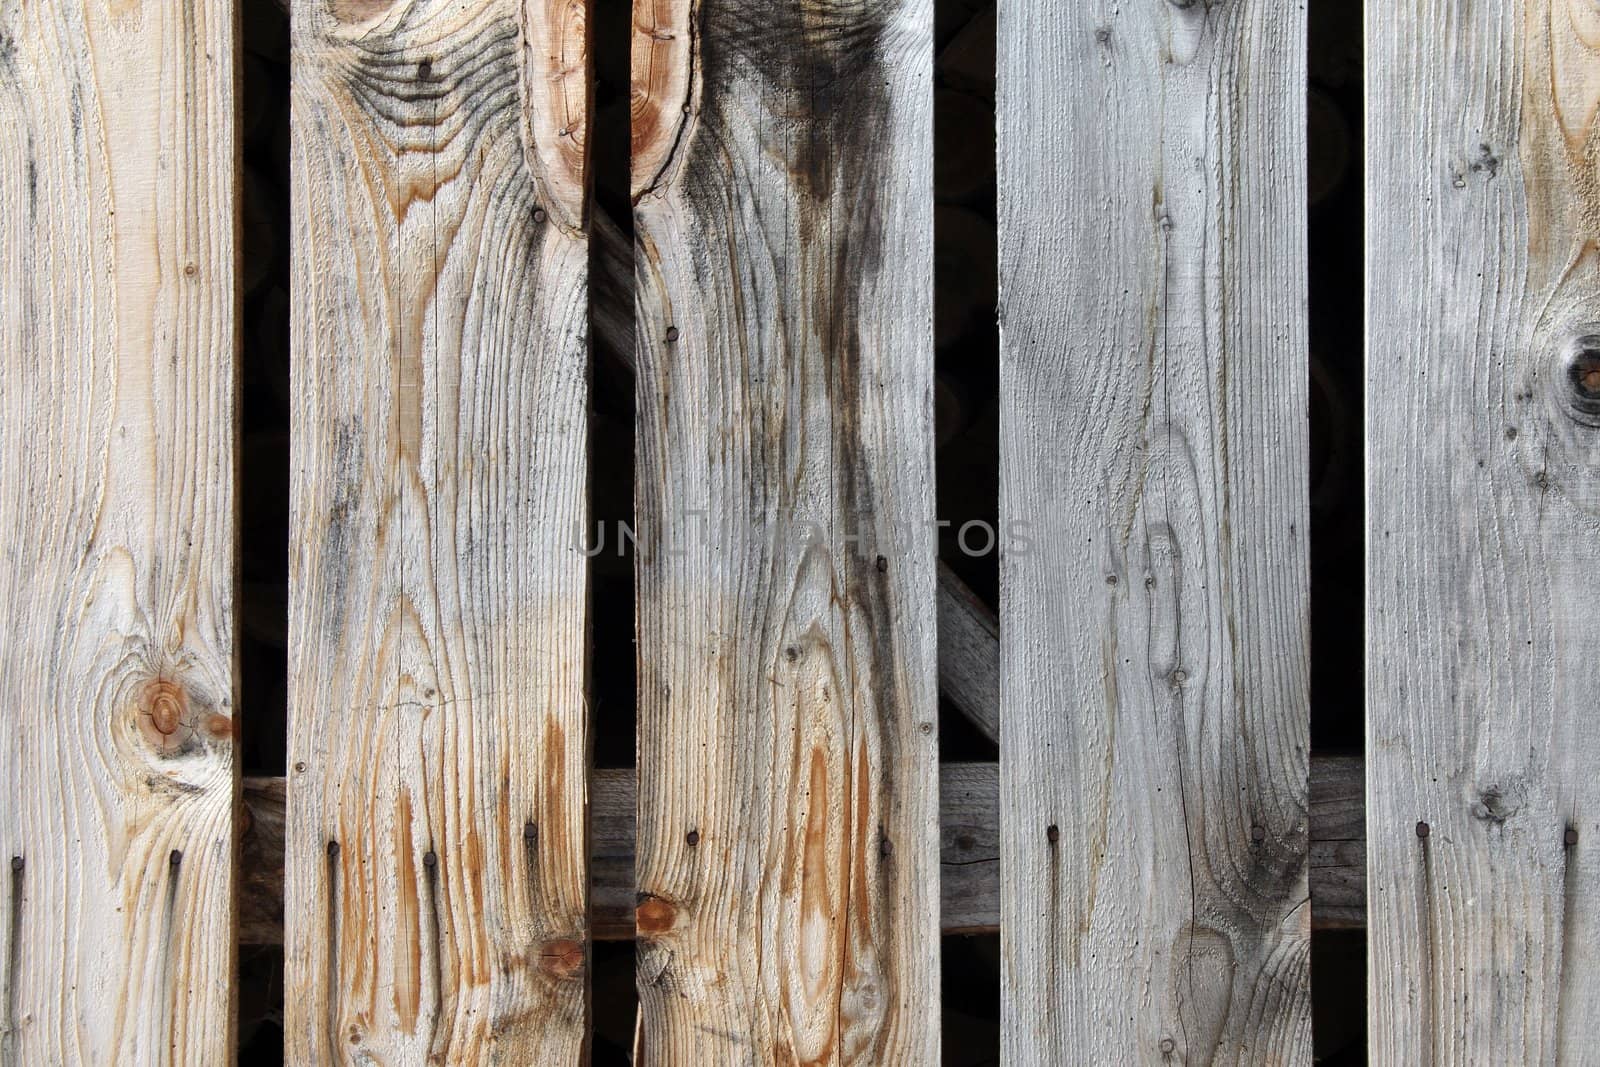 Colorful texture of knotty wooden planks, starting to get mossy.